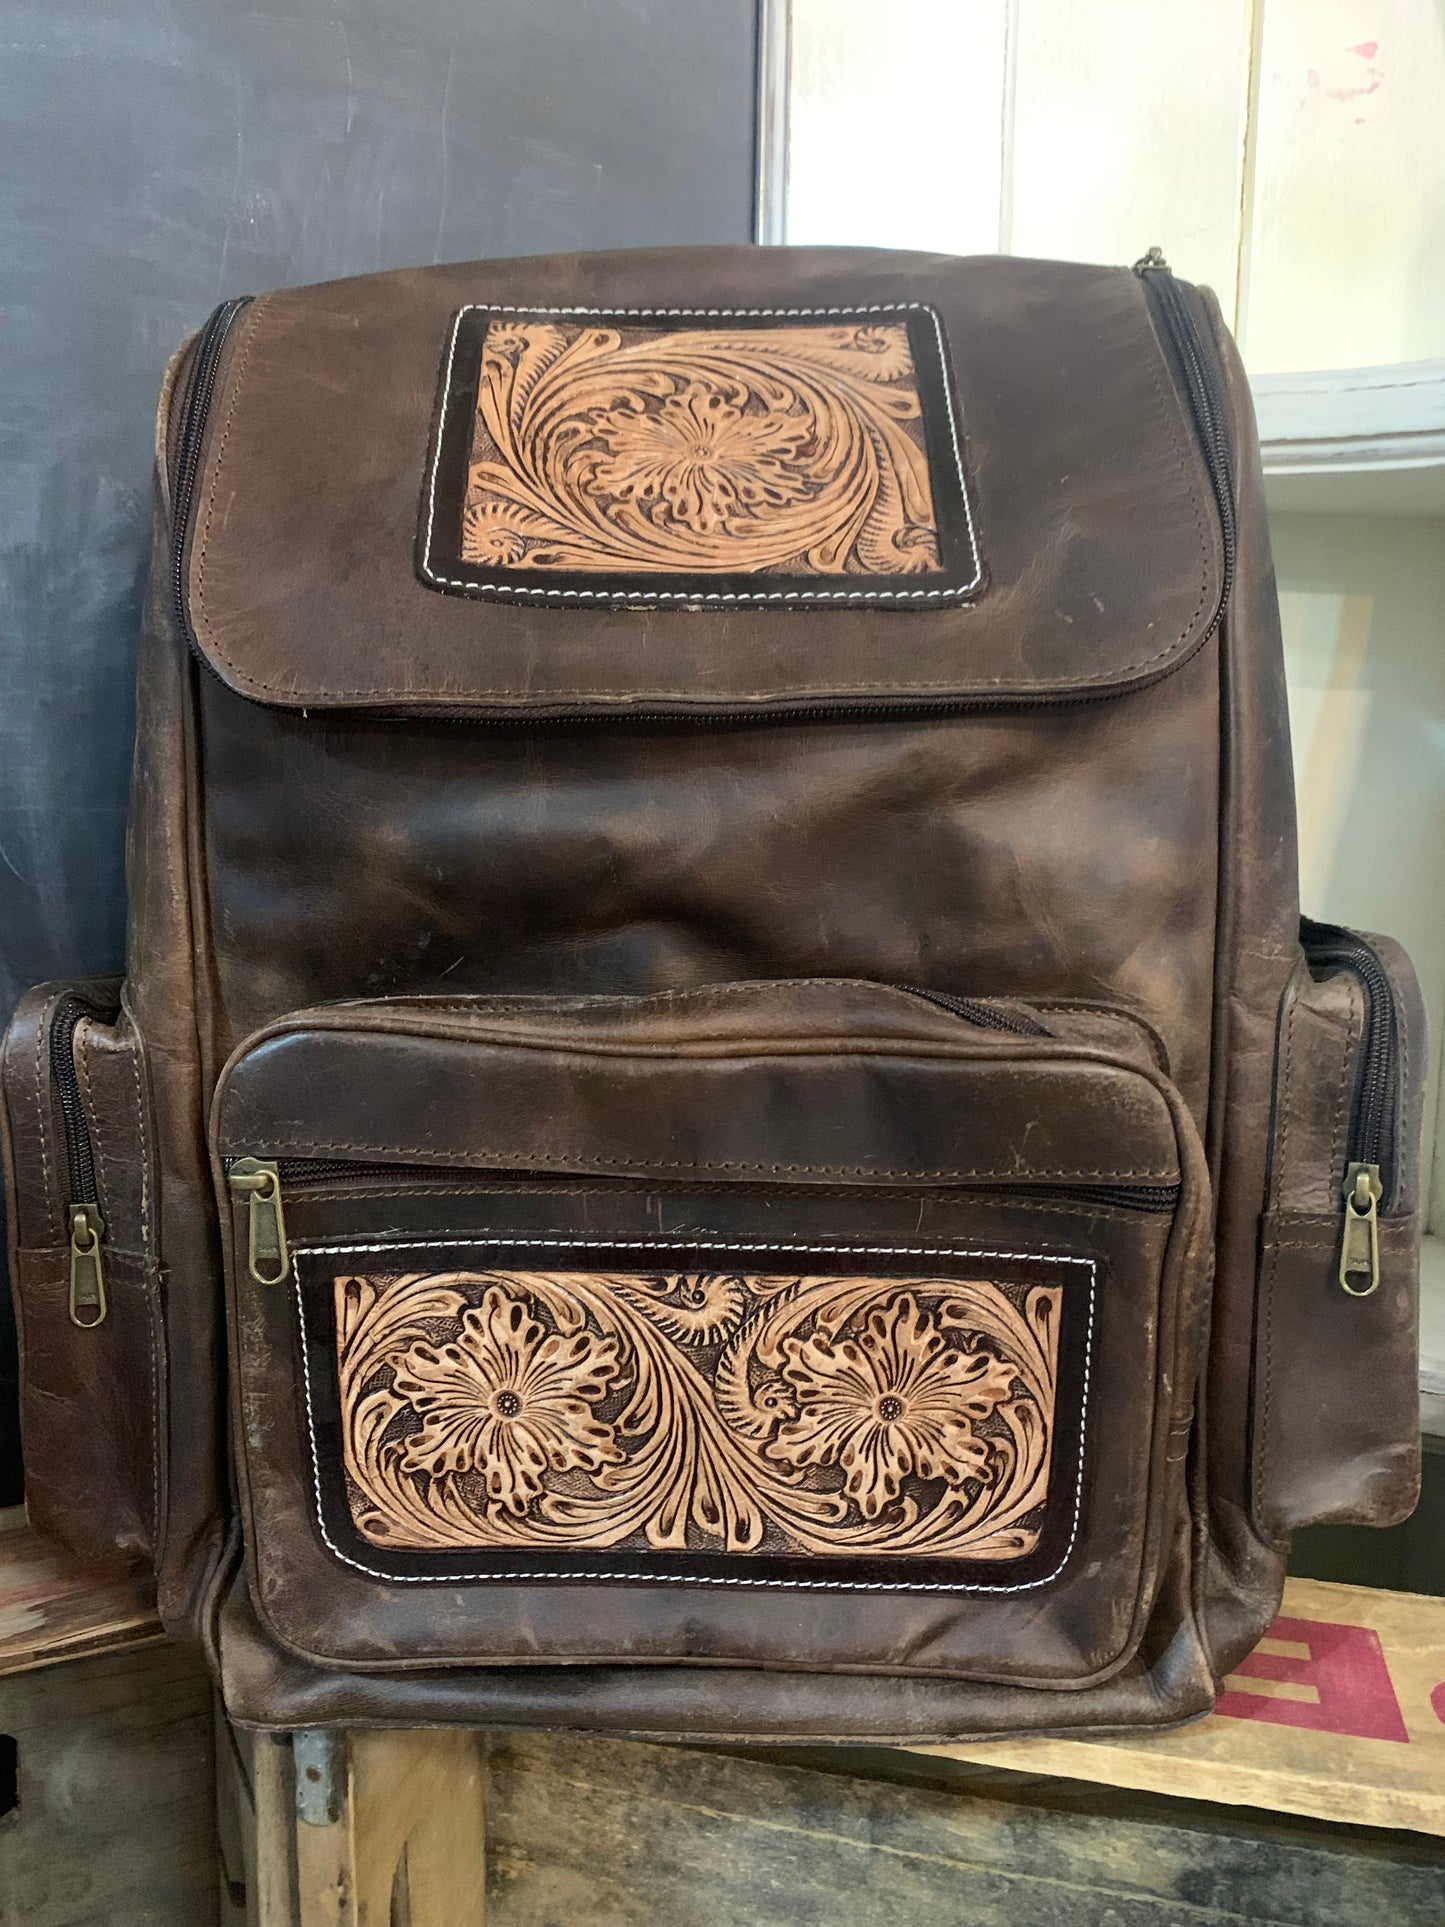 Erica backpack - tooled leather